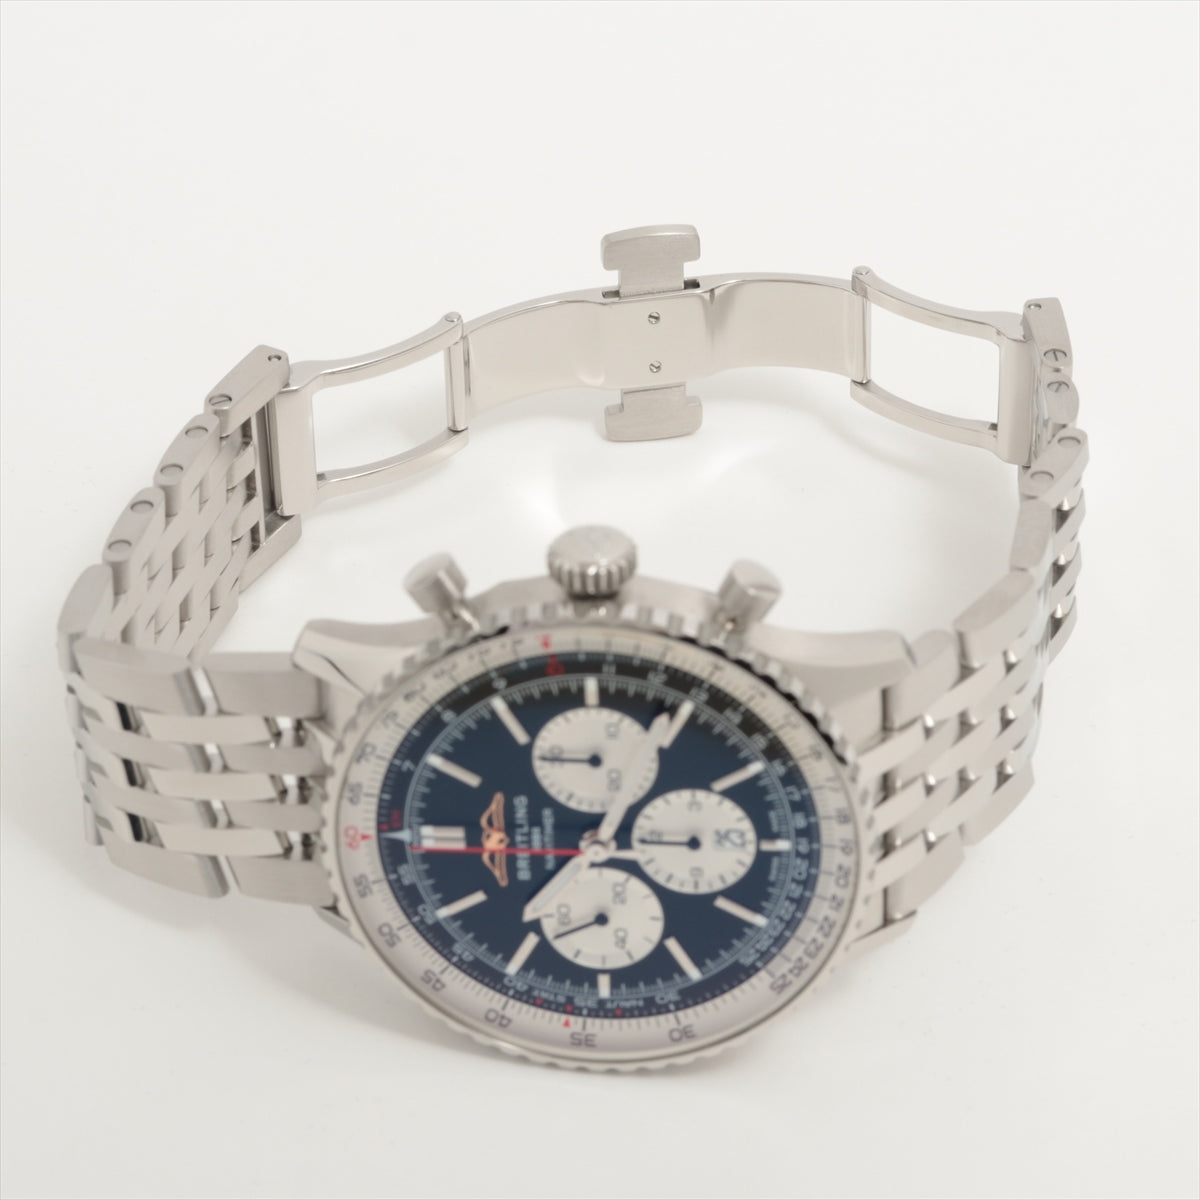 Breitling Navitimer B01 Chronograph AB0137 SS AT Black-Face Extra-Link 5